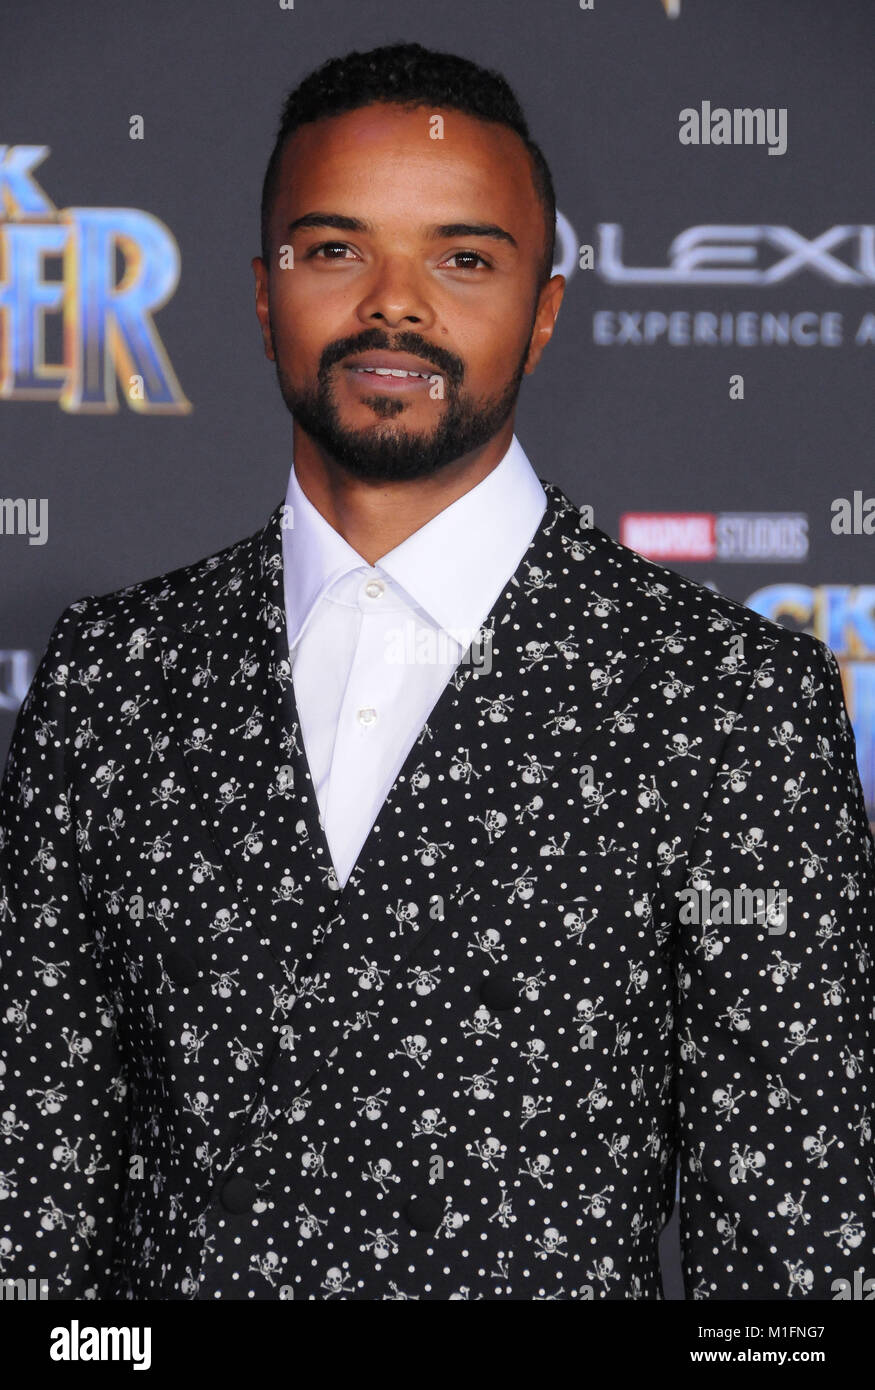 LOS ANGELES, CA - JANUARY 29: Actor Eka Darville attends the World Premiere of Marvel Studios' 'Black Panther' at Dolby Theatre on January 29, 2018 in Los Angeles, California. Photo by Barry King/Alamy Live News Stock Photo